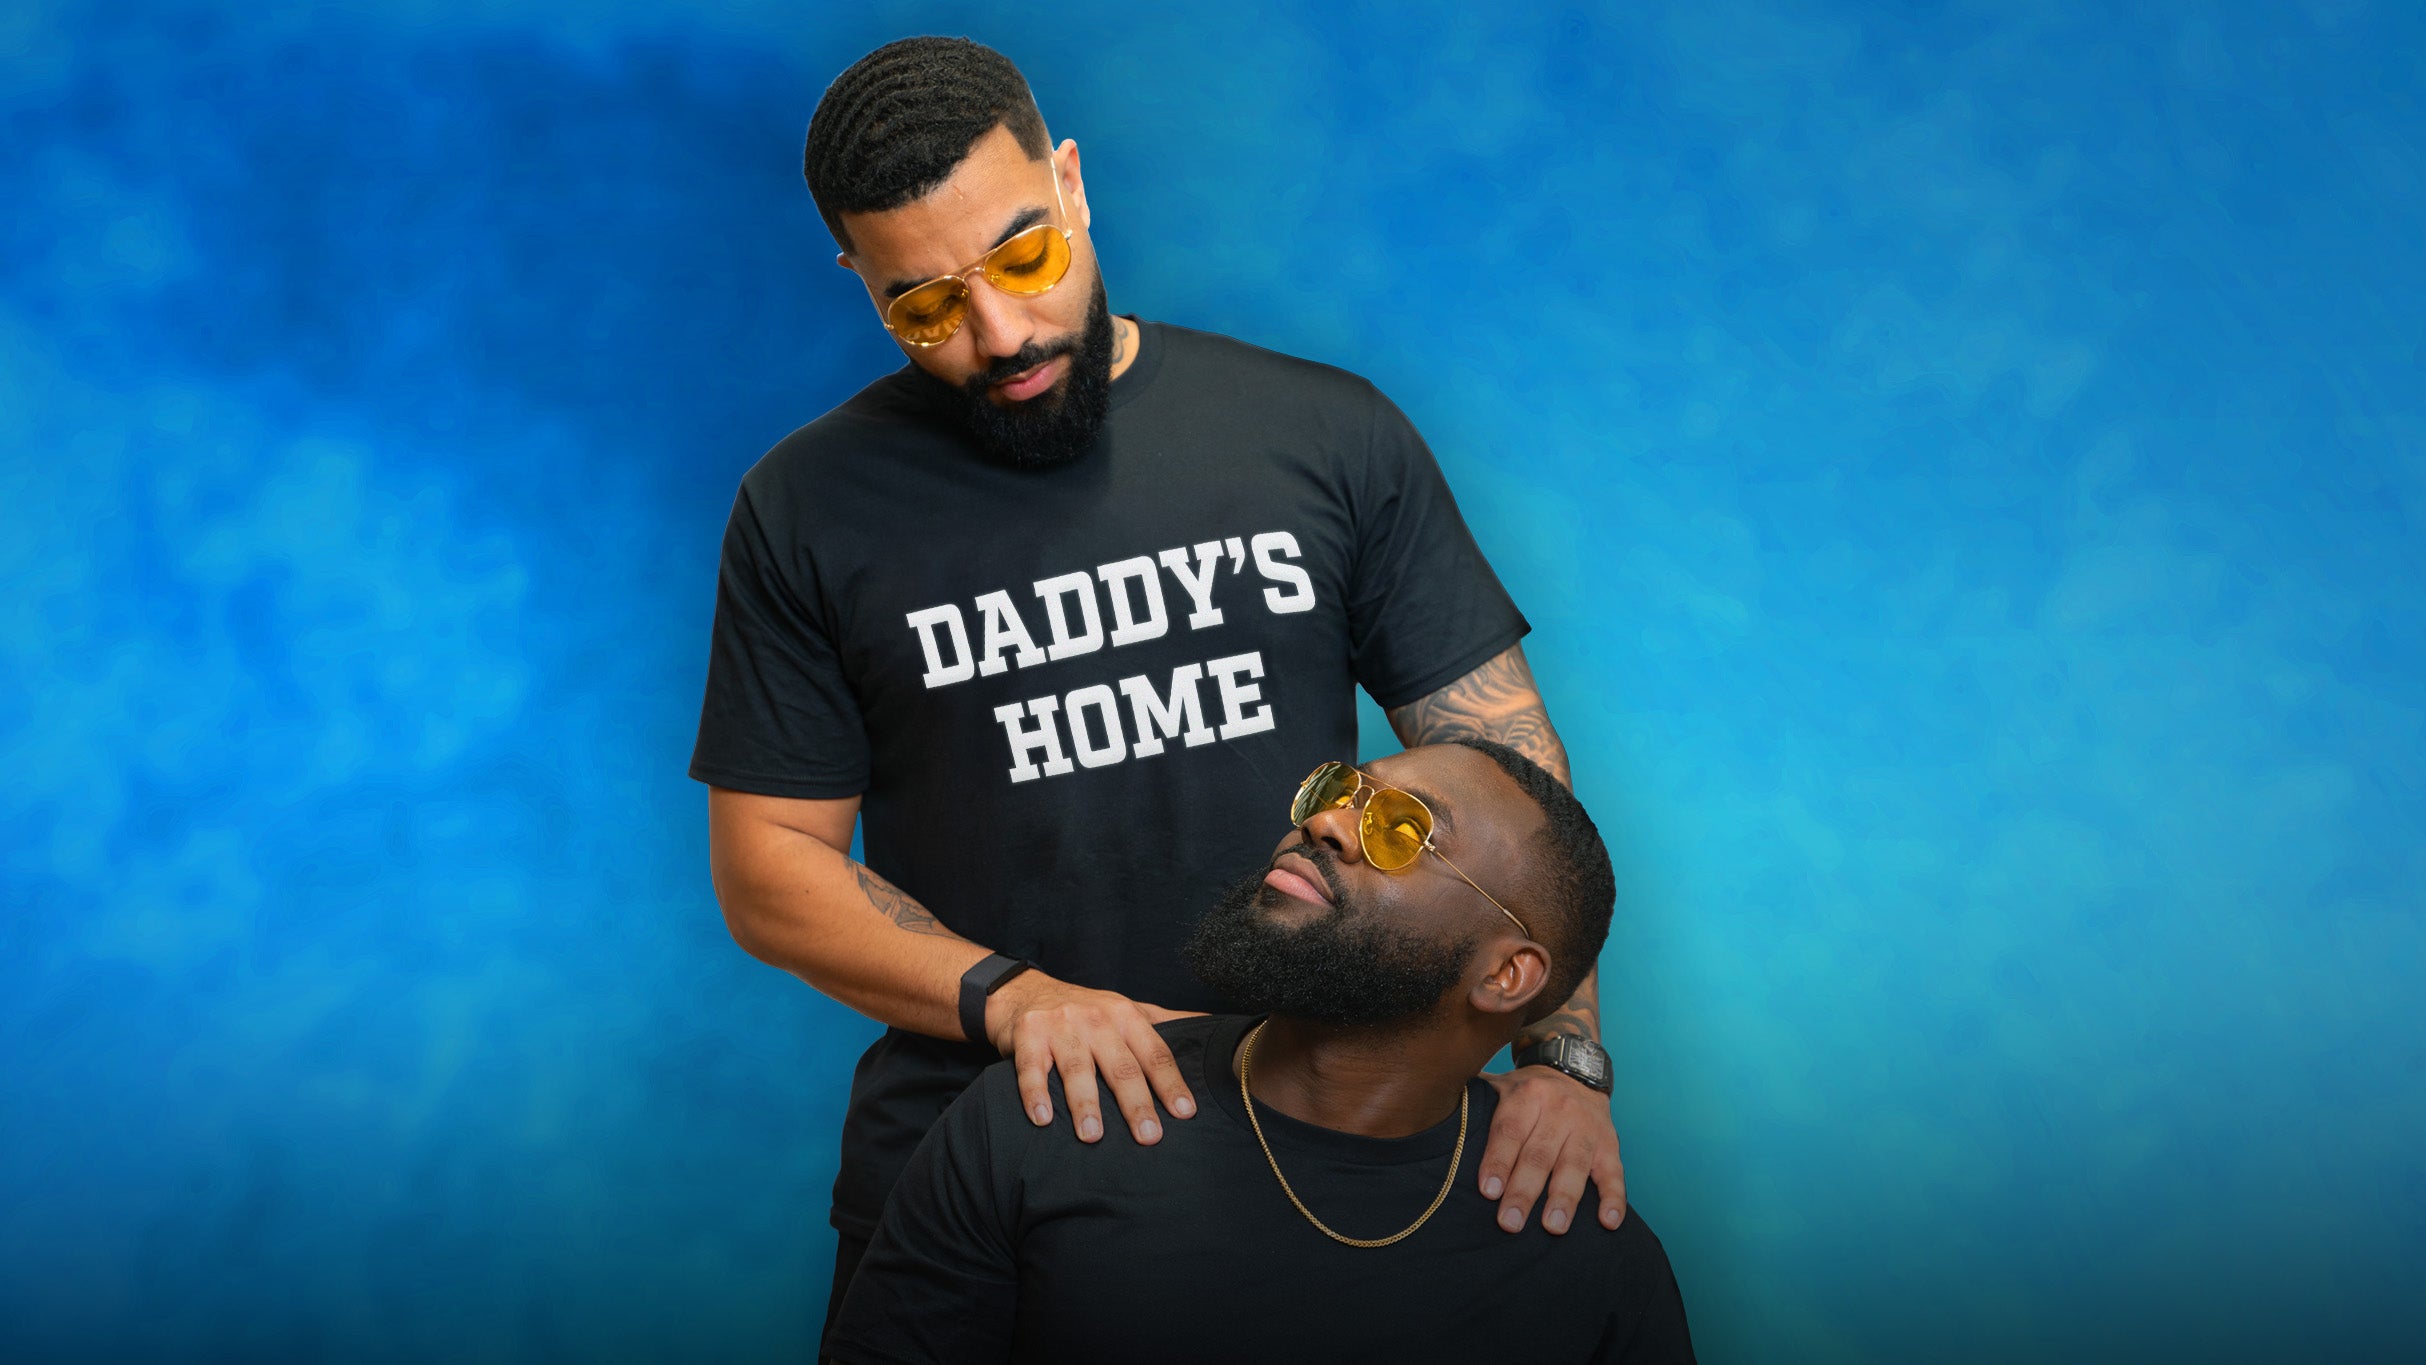 ShxtsNGigs - Daddy's Home Tour presale code for show tickets in Seattle, WA (Neptune Theatre)